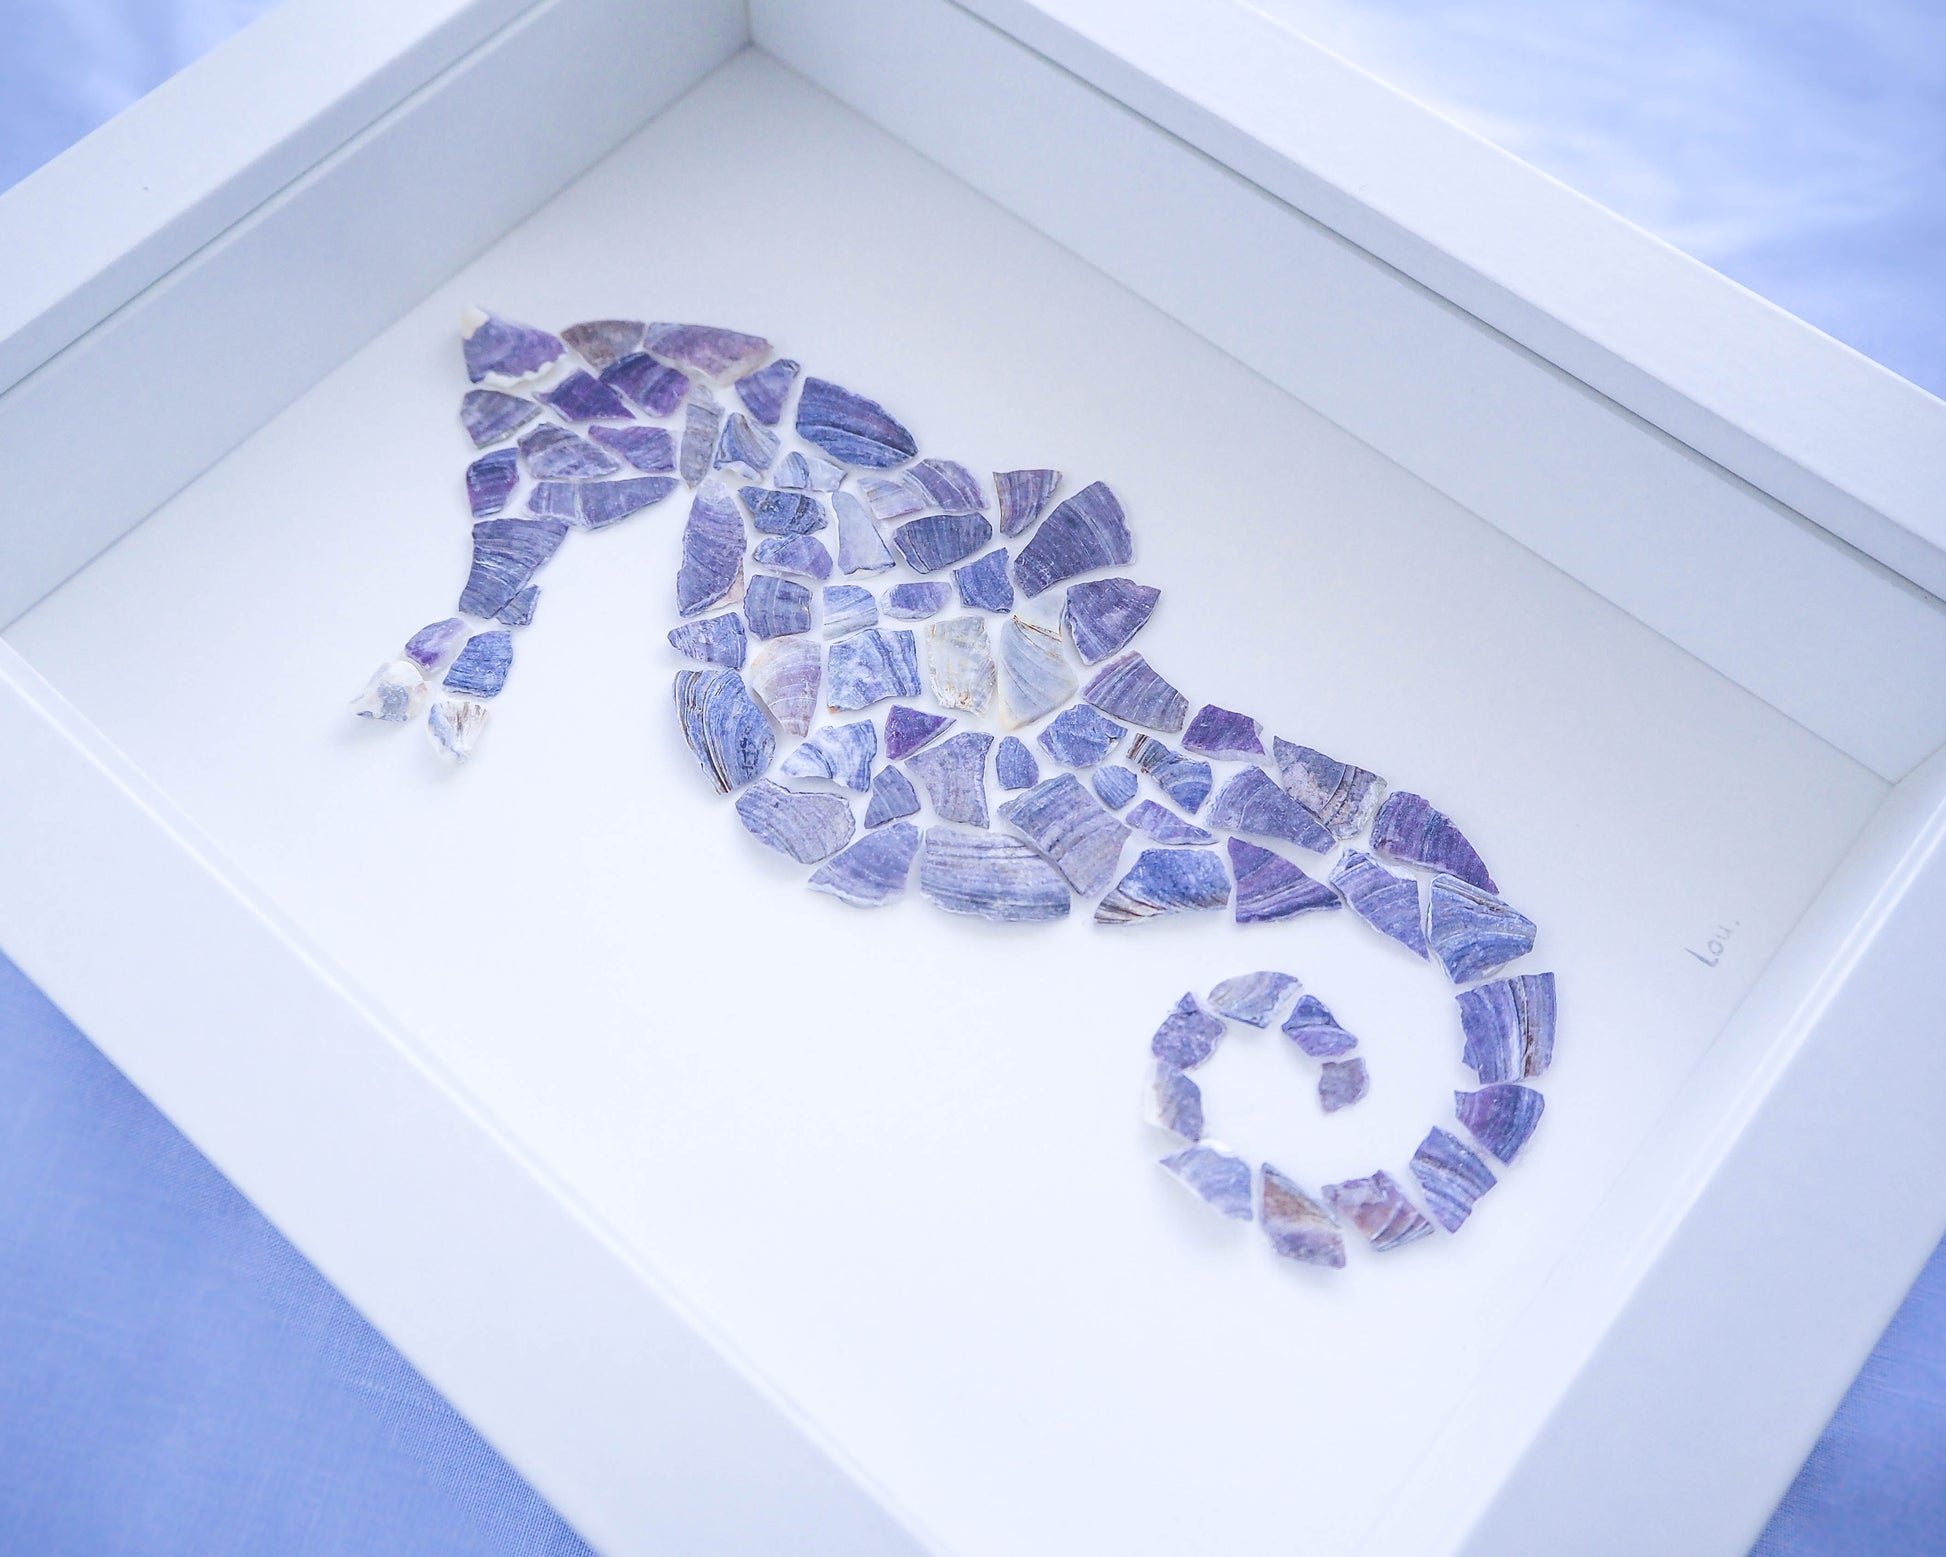 A detailed close-up of the seahorse mosaic, highlighting the meticulous arrangement of blue mussel shells that bring the creature's form to life